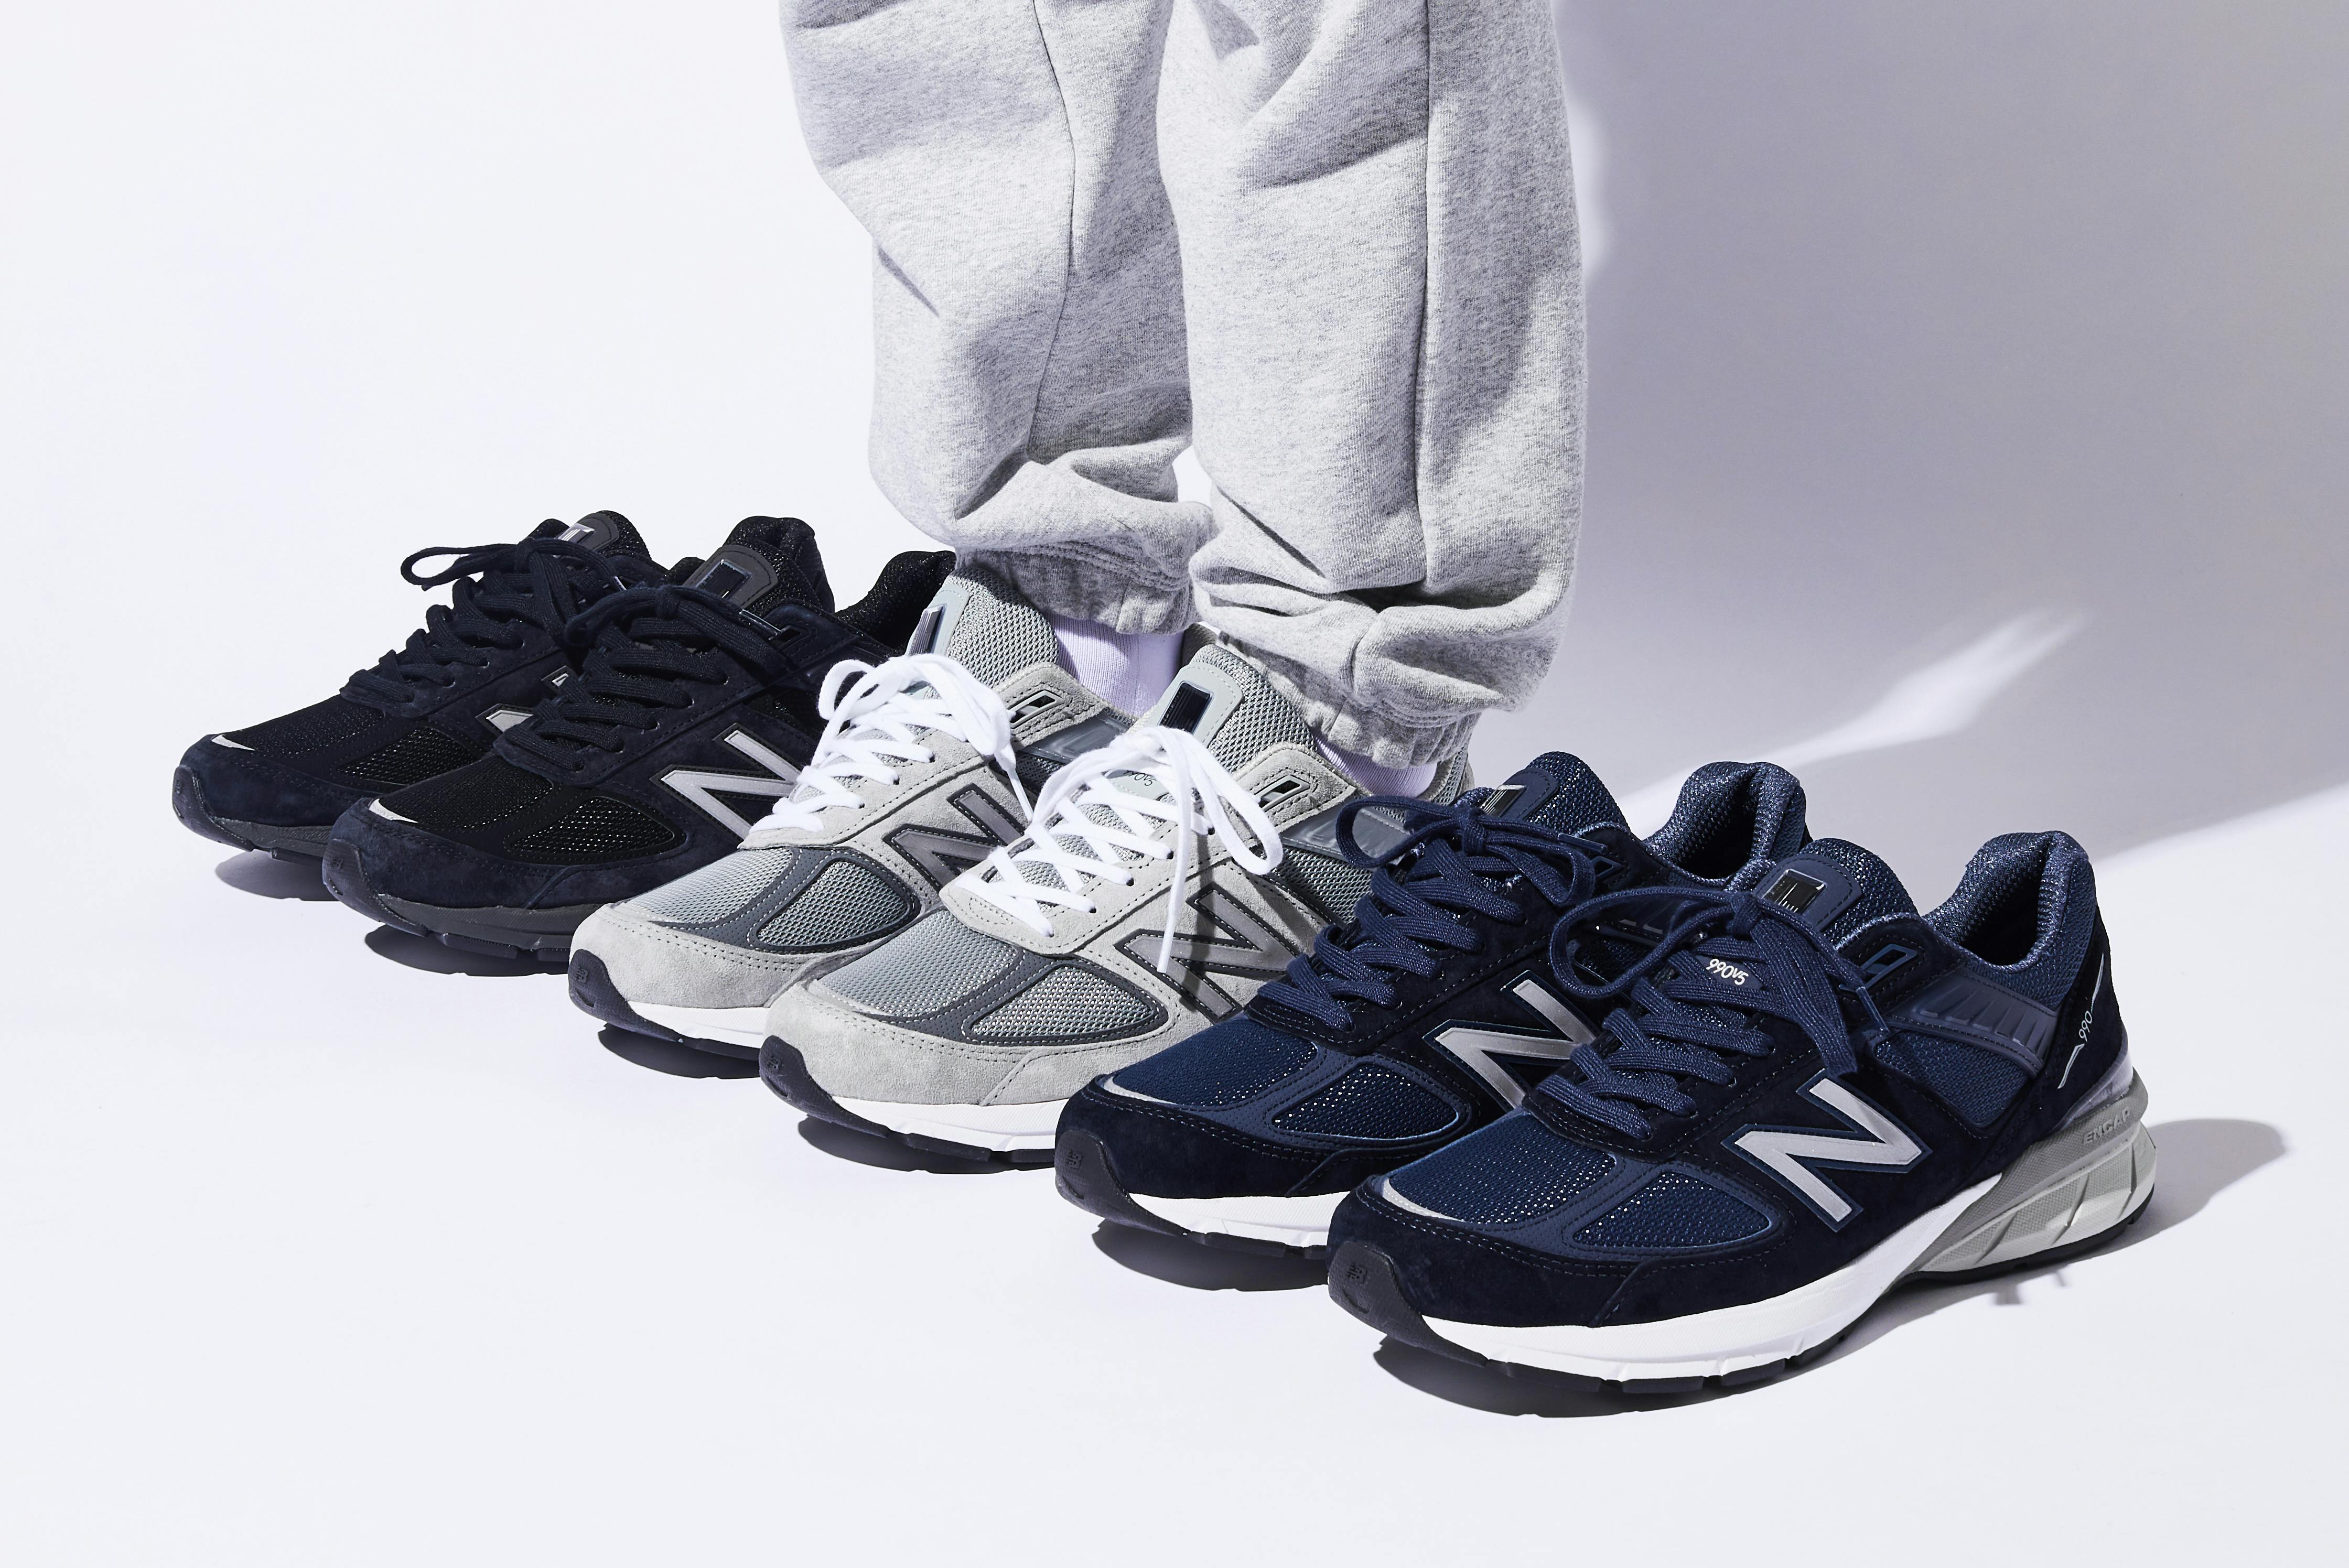 New Balance M990v5 Register Now on END. Launches |